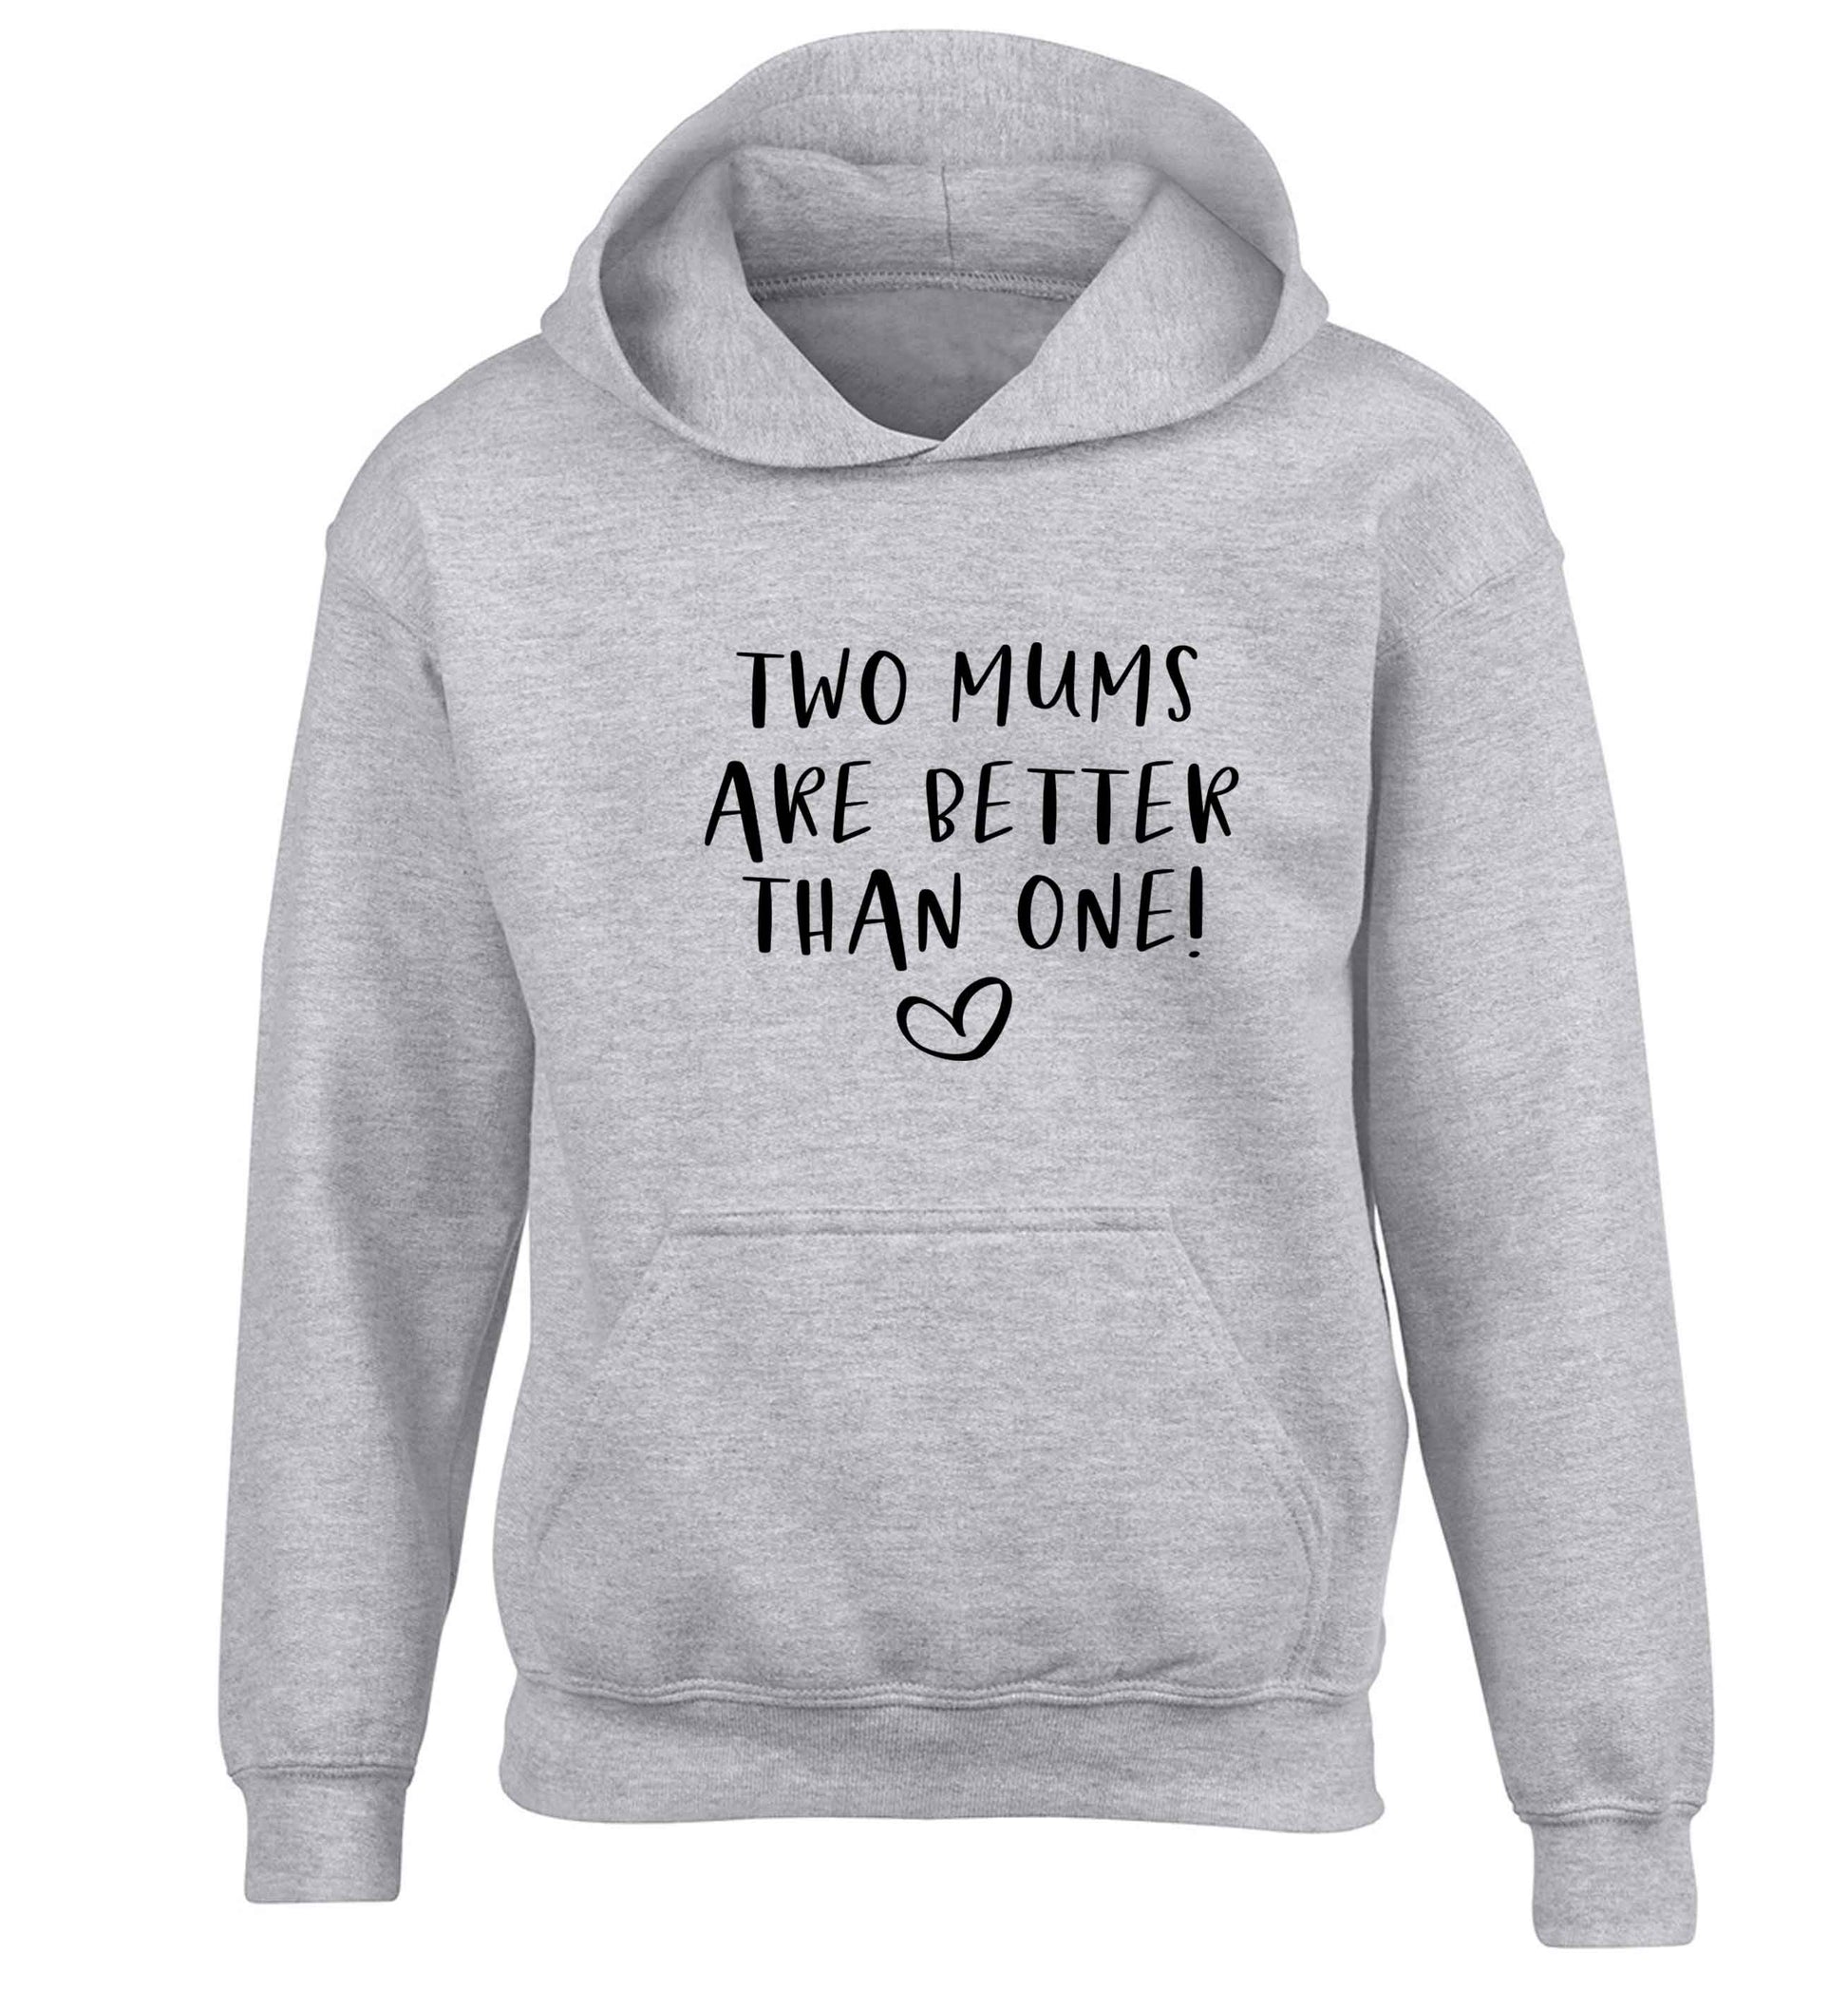 Two mums are better than one children's grey hoodie 12-13 Years